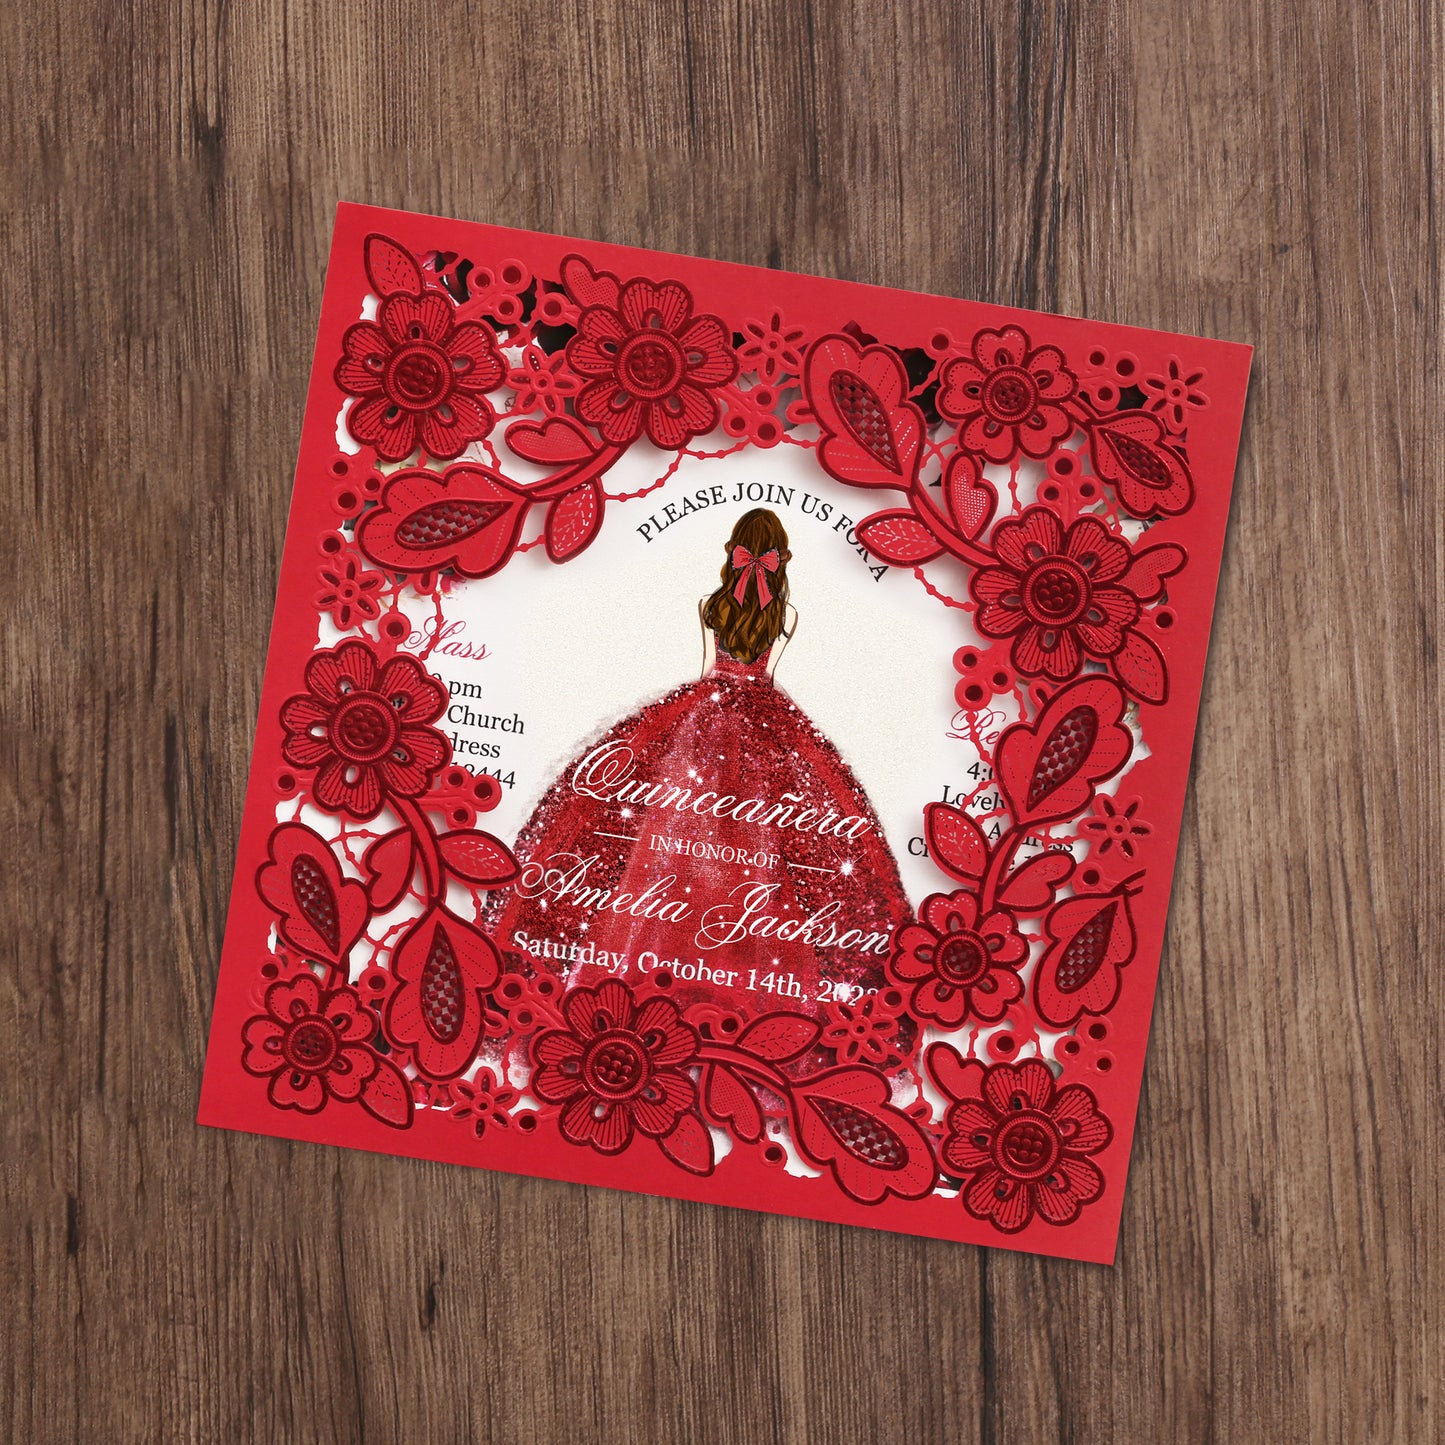 Customized Quinceanera Invitation Red, Elegant 15 years Invitations Sweet 16, Miss XV, Birthday Laser Cut Quince Invitation Cards Red Personalized